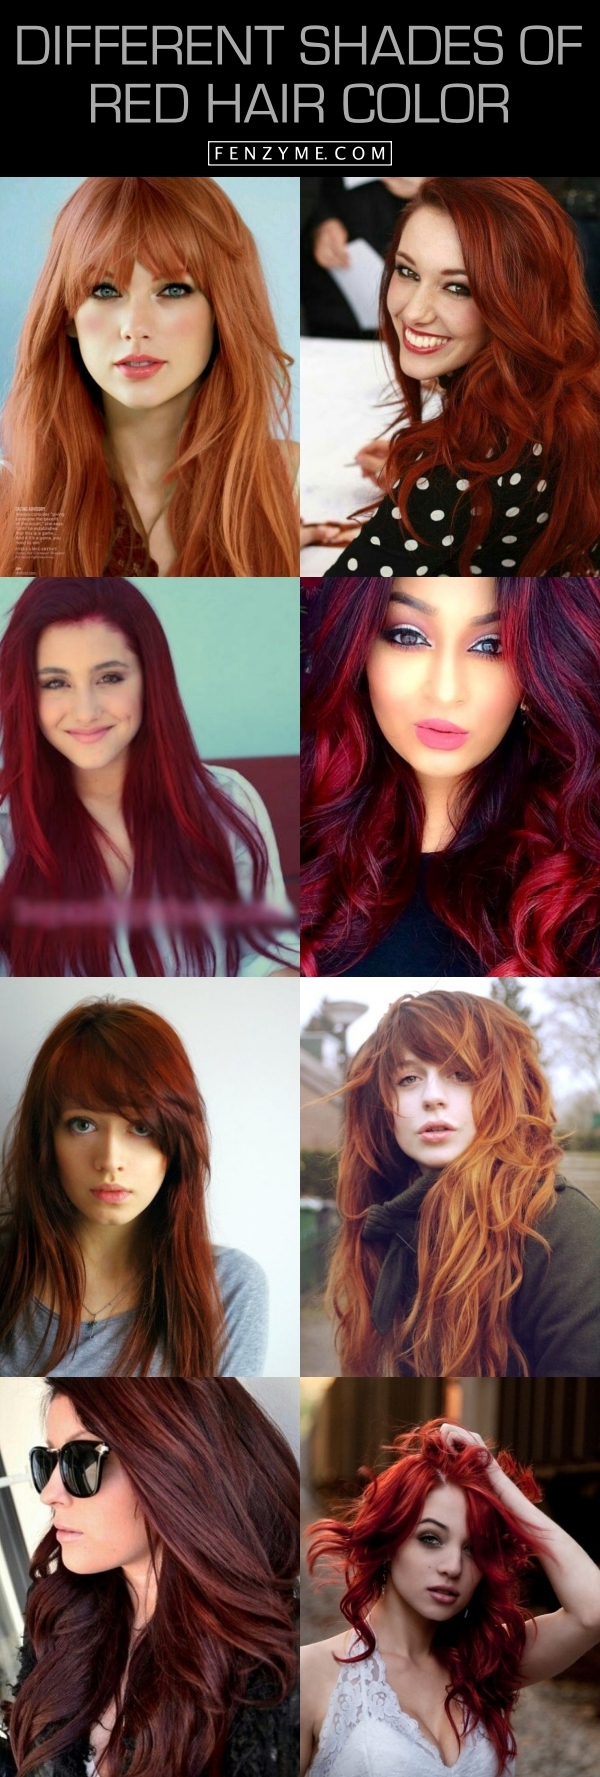 Different Shades of Red Hair Color